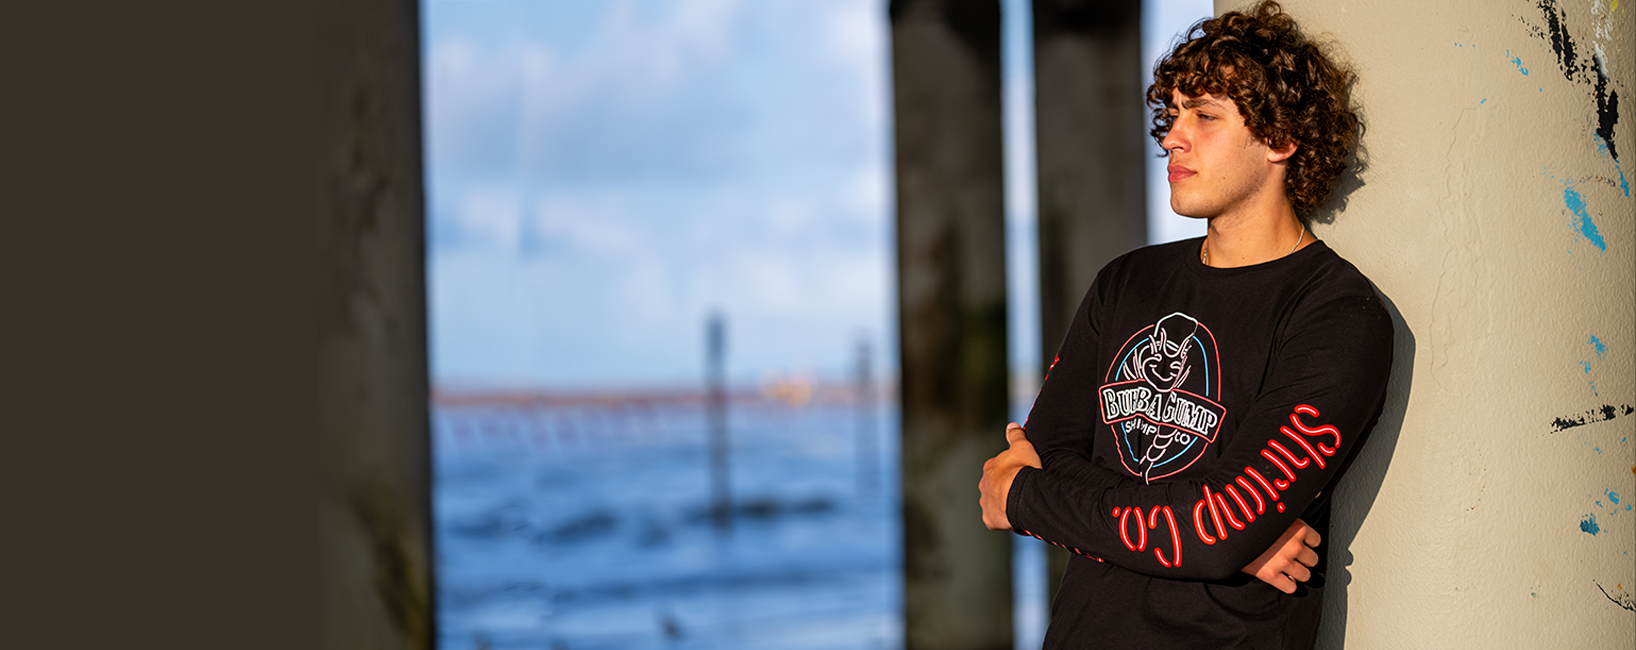 male model with curly hair, wearing black long sleeve Bubba Gump x Mitchell & Ness top. He has his arms crossed and is leaning against a pole at the beach.